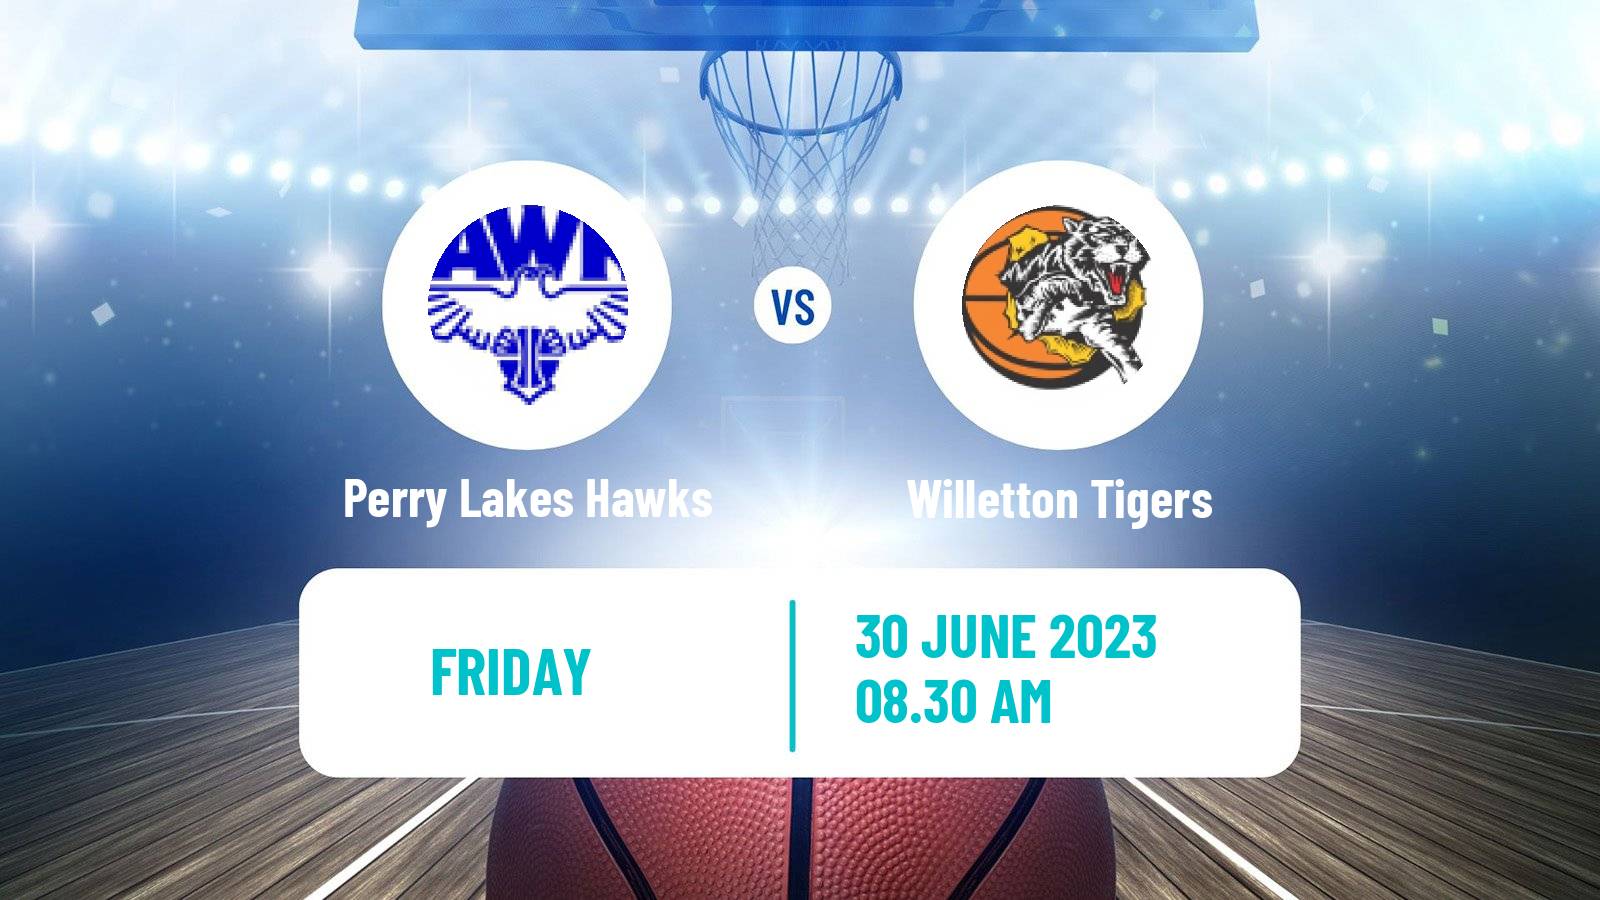 Basketball Australian NBL1 West Perry Lakes Hawks - Willetton Tigers